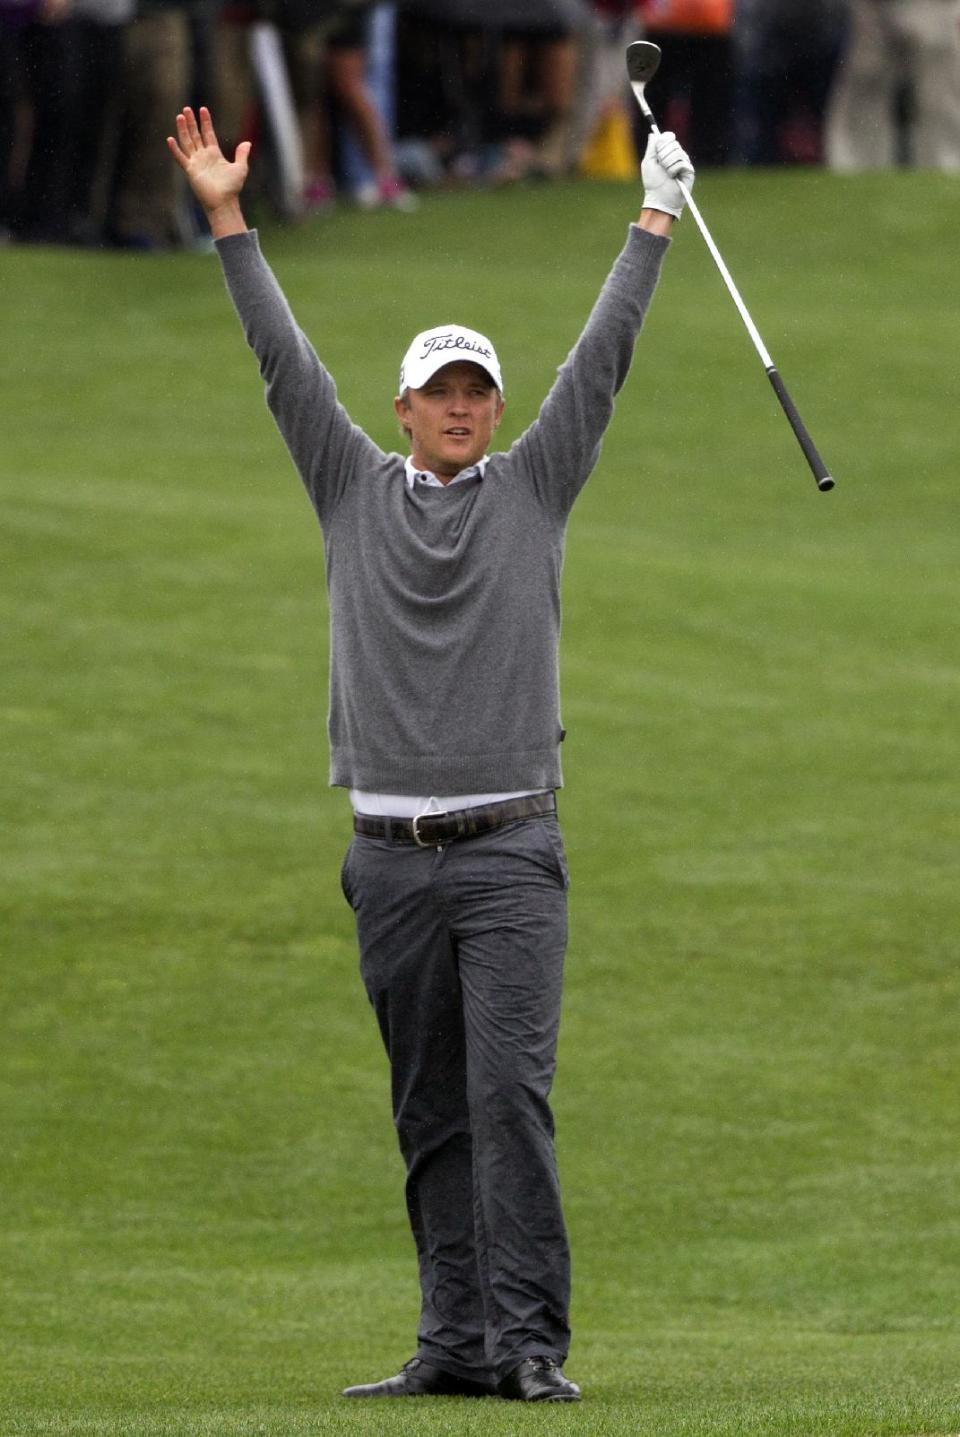 Matt Jones celebrates after chipping in for birdie on a playoff hole against Matt Kuchar to win the Houston Open golf tournament on Sunday, April 6, 2014, in Humble, Texas. (AP Photo/Patric Schneider)